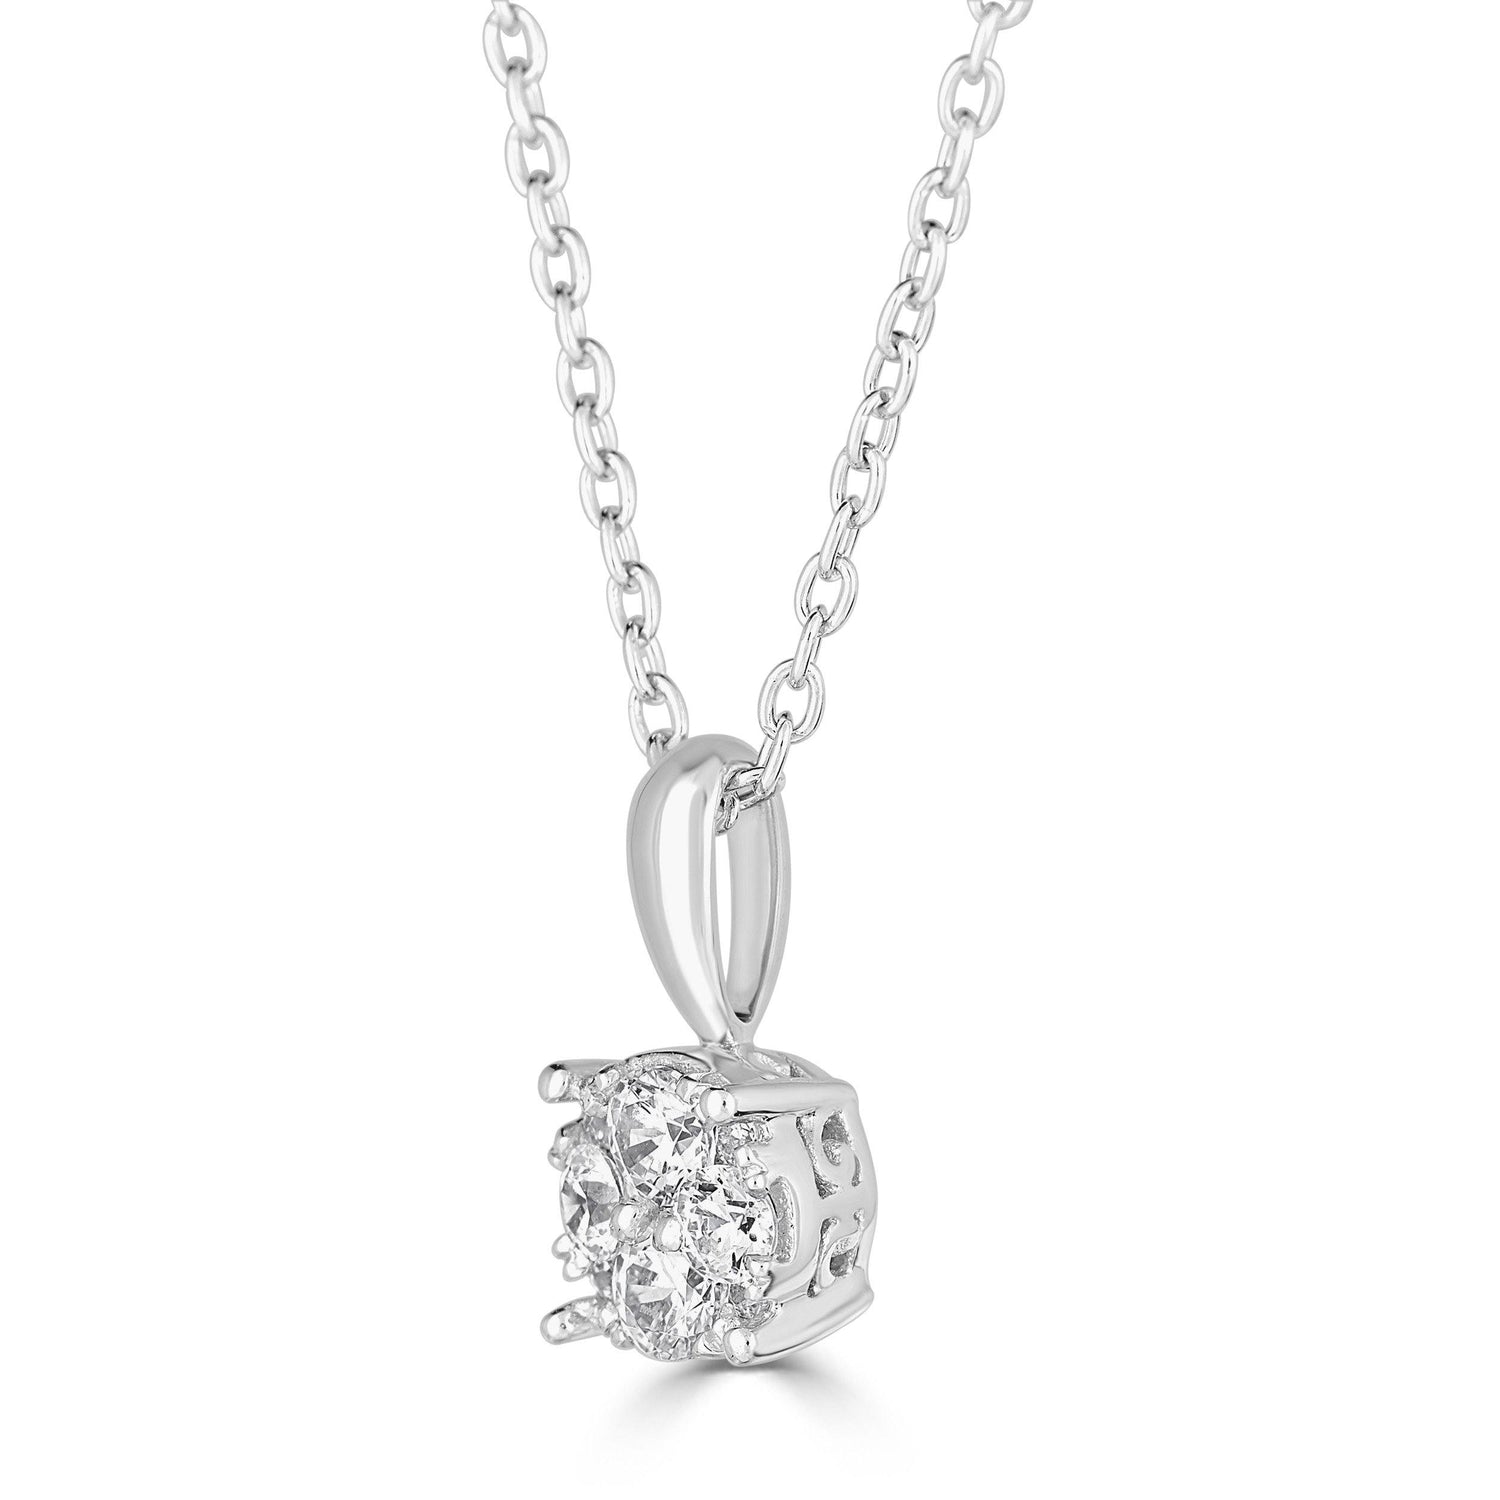 1/4CT.TW of Diamonds to Create a Grander look, Uniquely crafted in Sterling Silver - Fifth and Fine